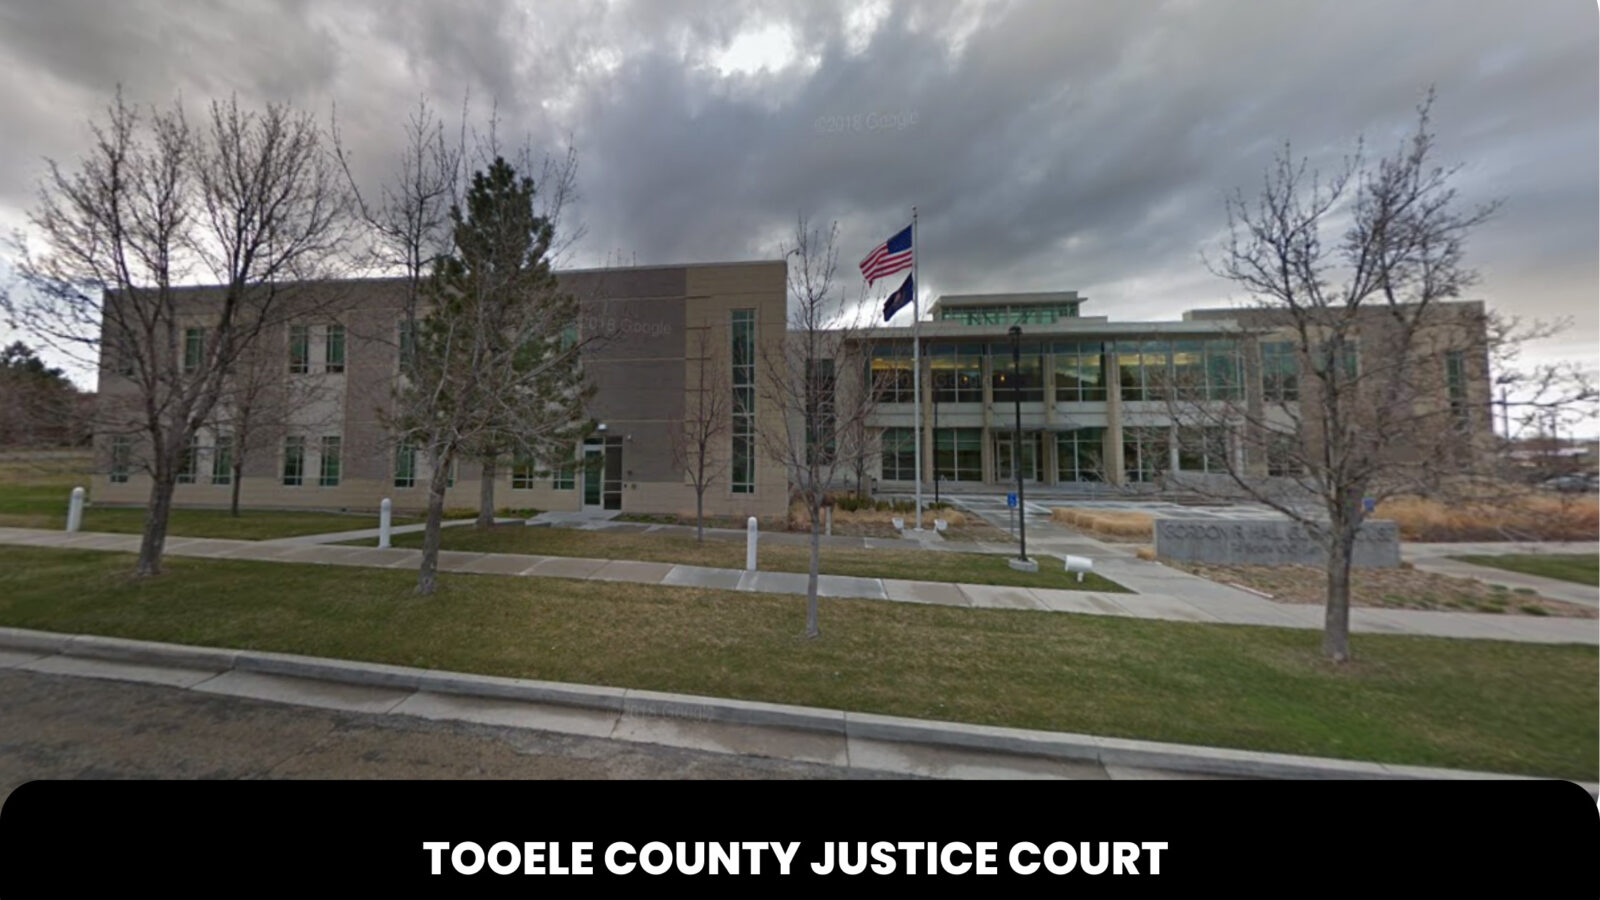 Tooele County Justice Court